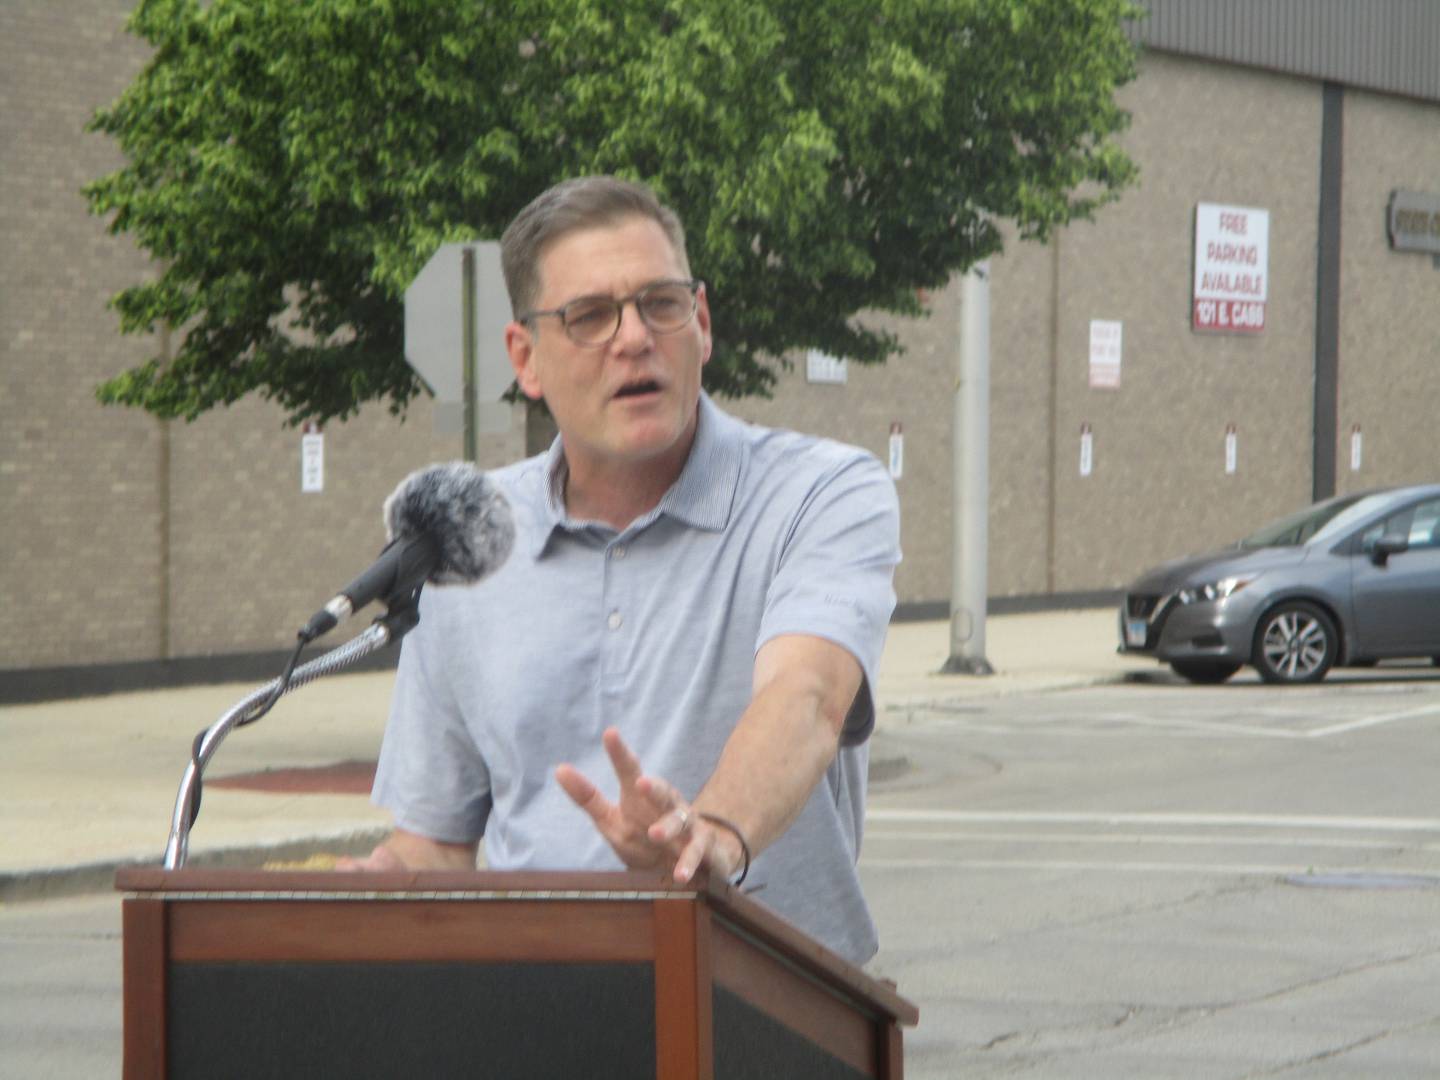 Rod Tonelli, seen speaking in his capacity as chairman of the Joliet City Center Partnership at an event on June 1, would be hired as interim city manager for Joliet, according to an agreement that goes to the City Council for a vote at a special meeting on Friday.